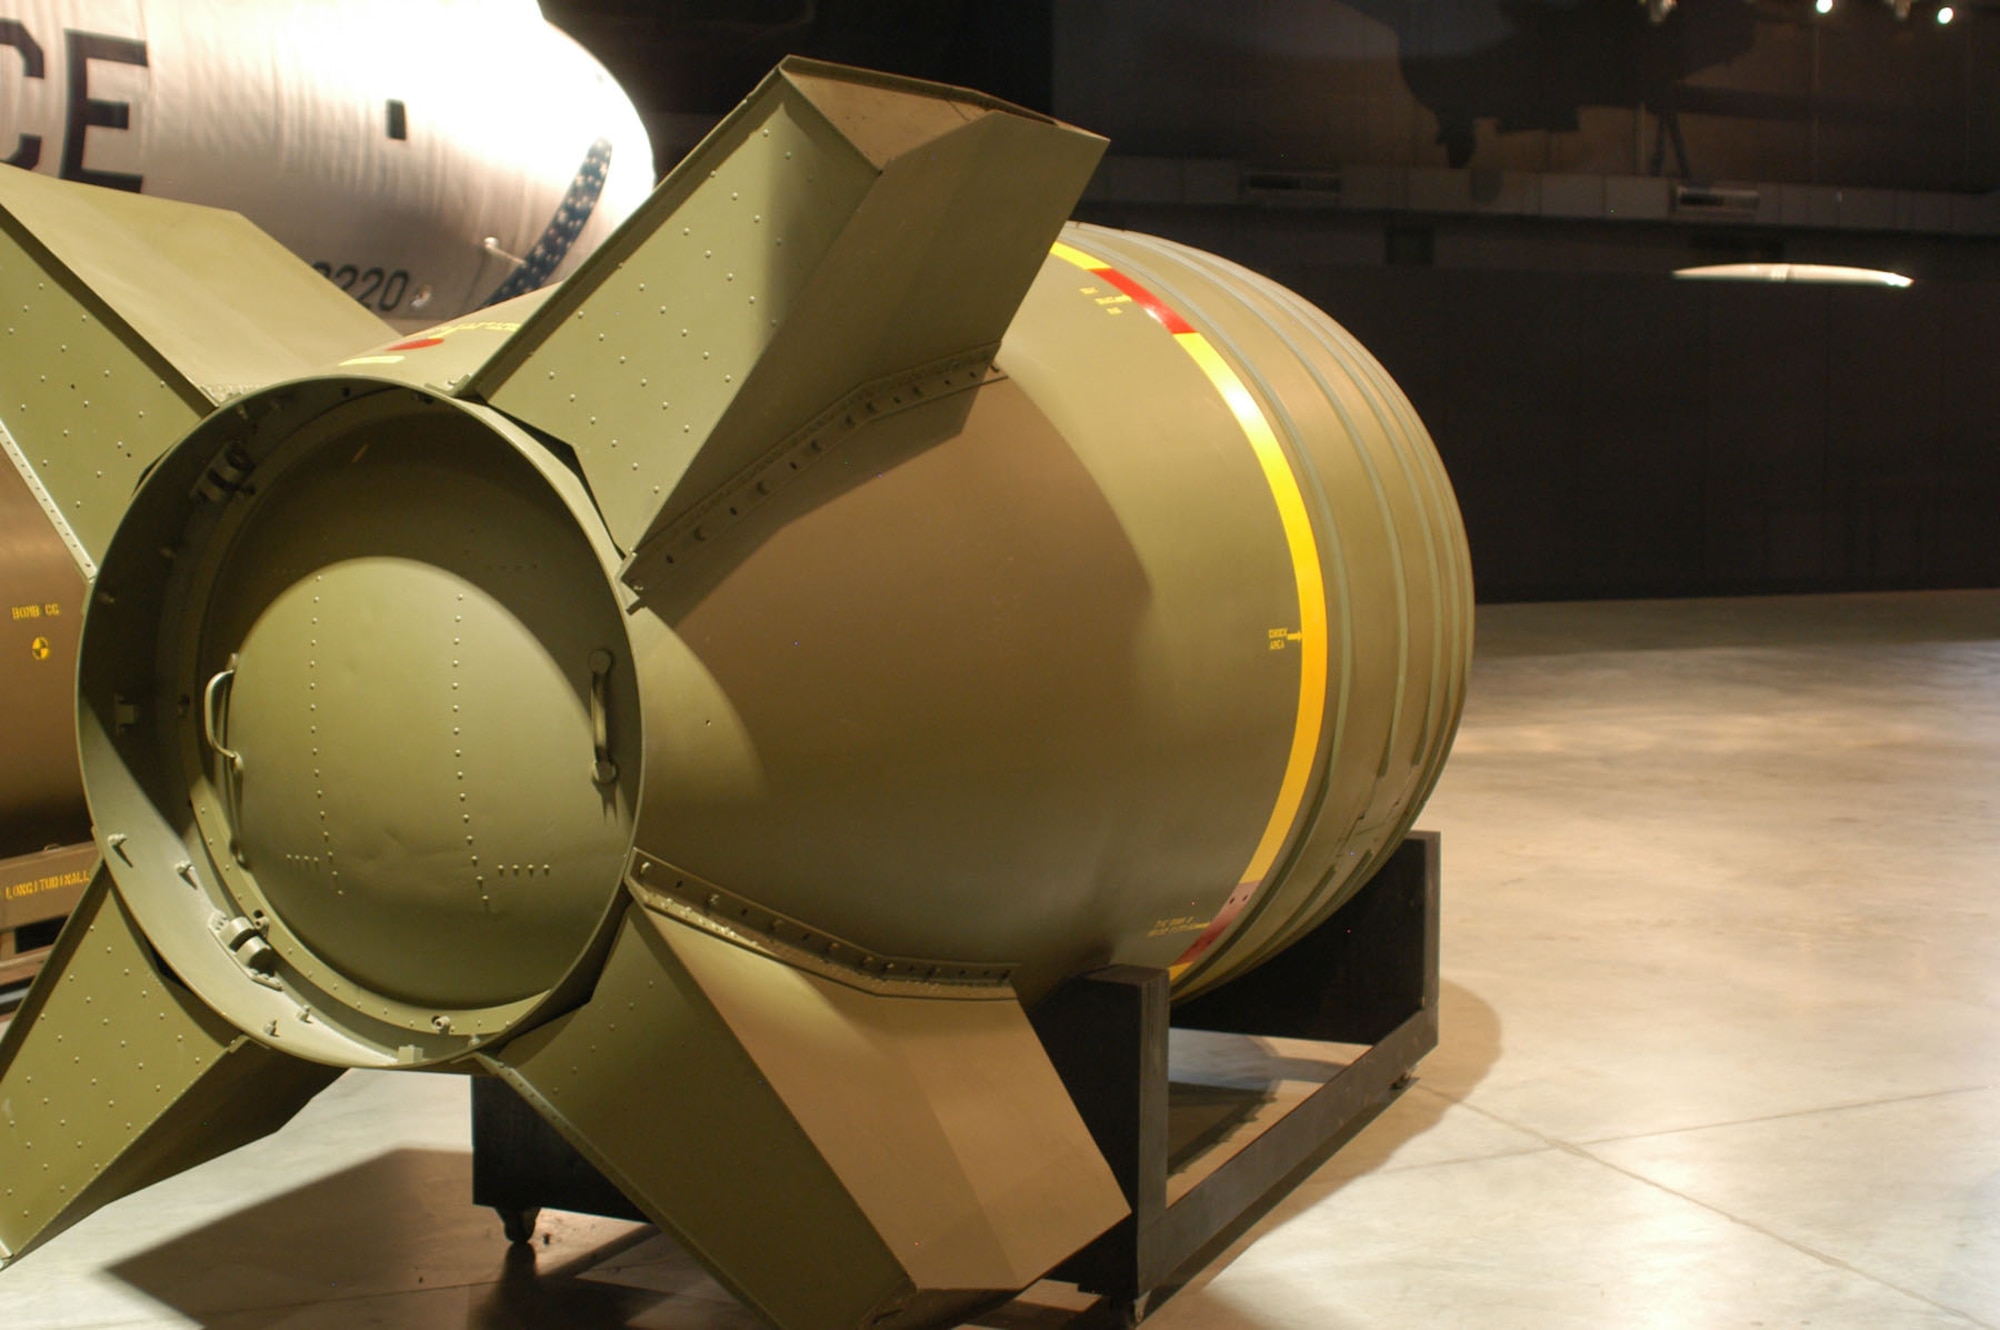 DAYTON, Ohio - Mark VI Aerial Bomb on display at the National Museum of the U.S. Air Force. (U.S. Air Force photo)